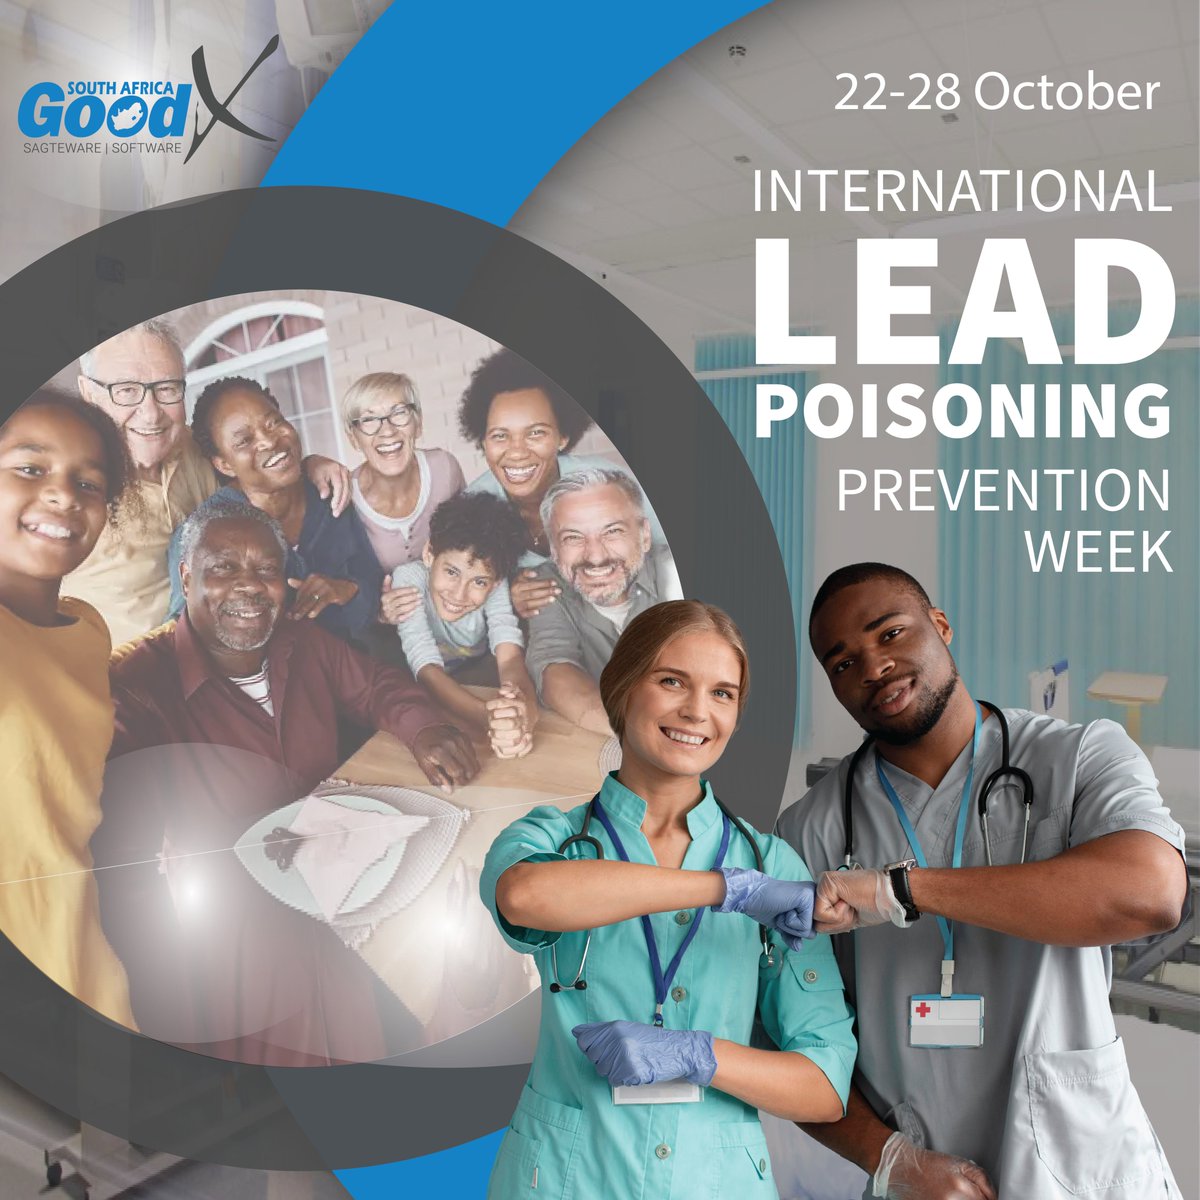 GoodX Software proudly stands with the global community in support of International Lead Poisoning Prevention Week! 🌍💙 Let's work together to raise awareness, promote safe practices, and protect our future generations from the dangers of lead exposure. #LeadFreeFuture